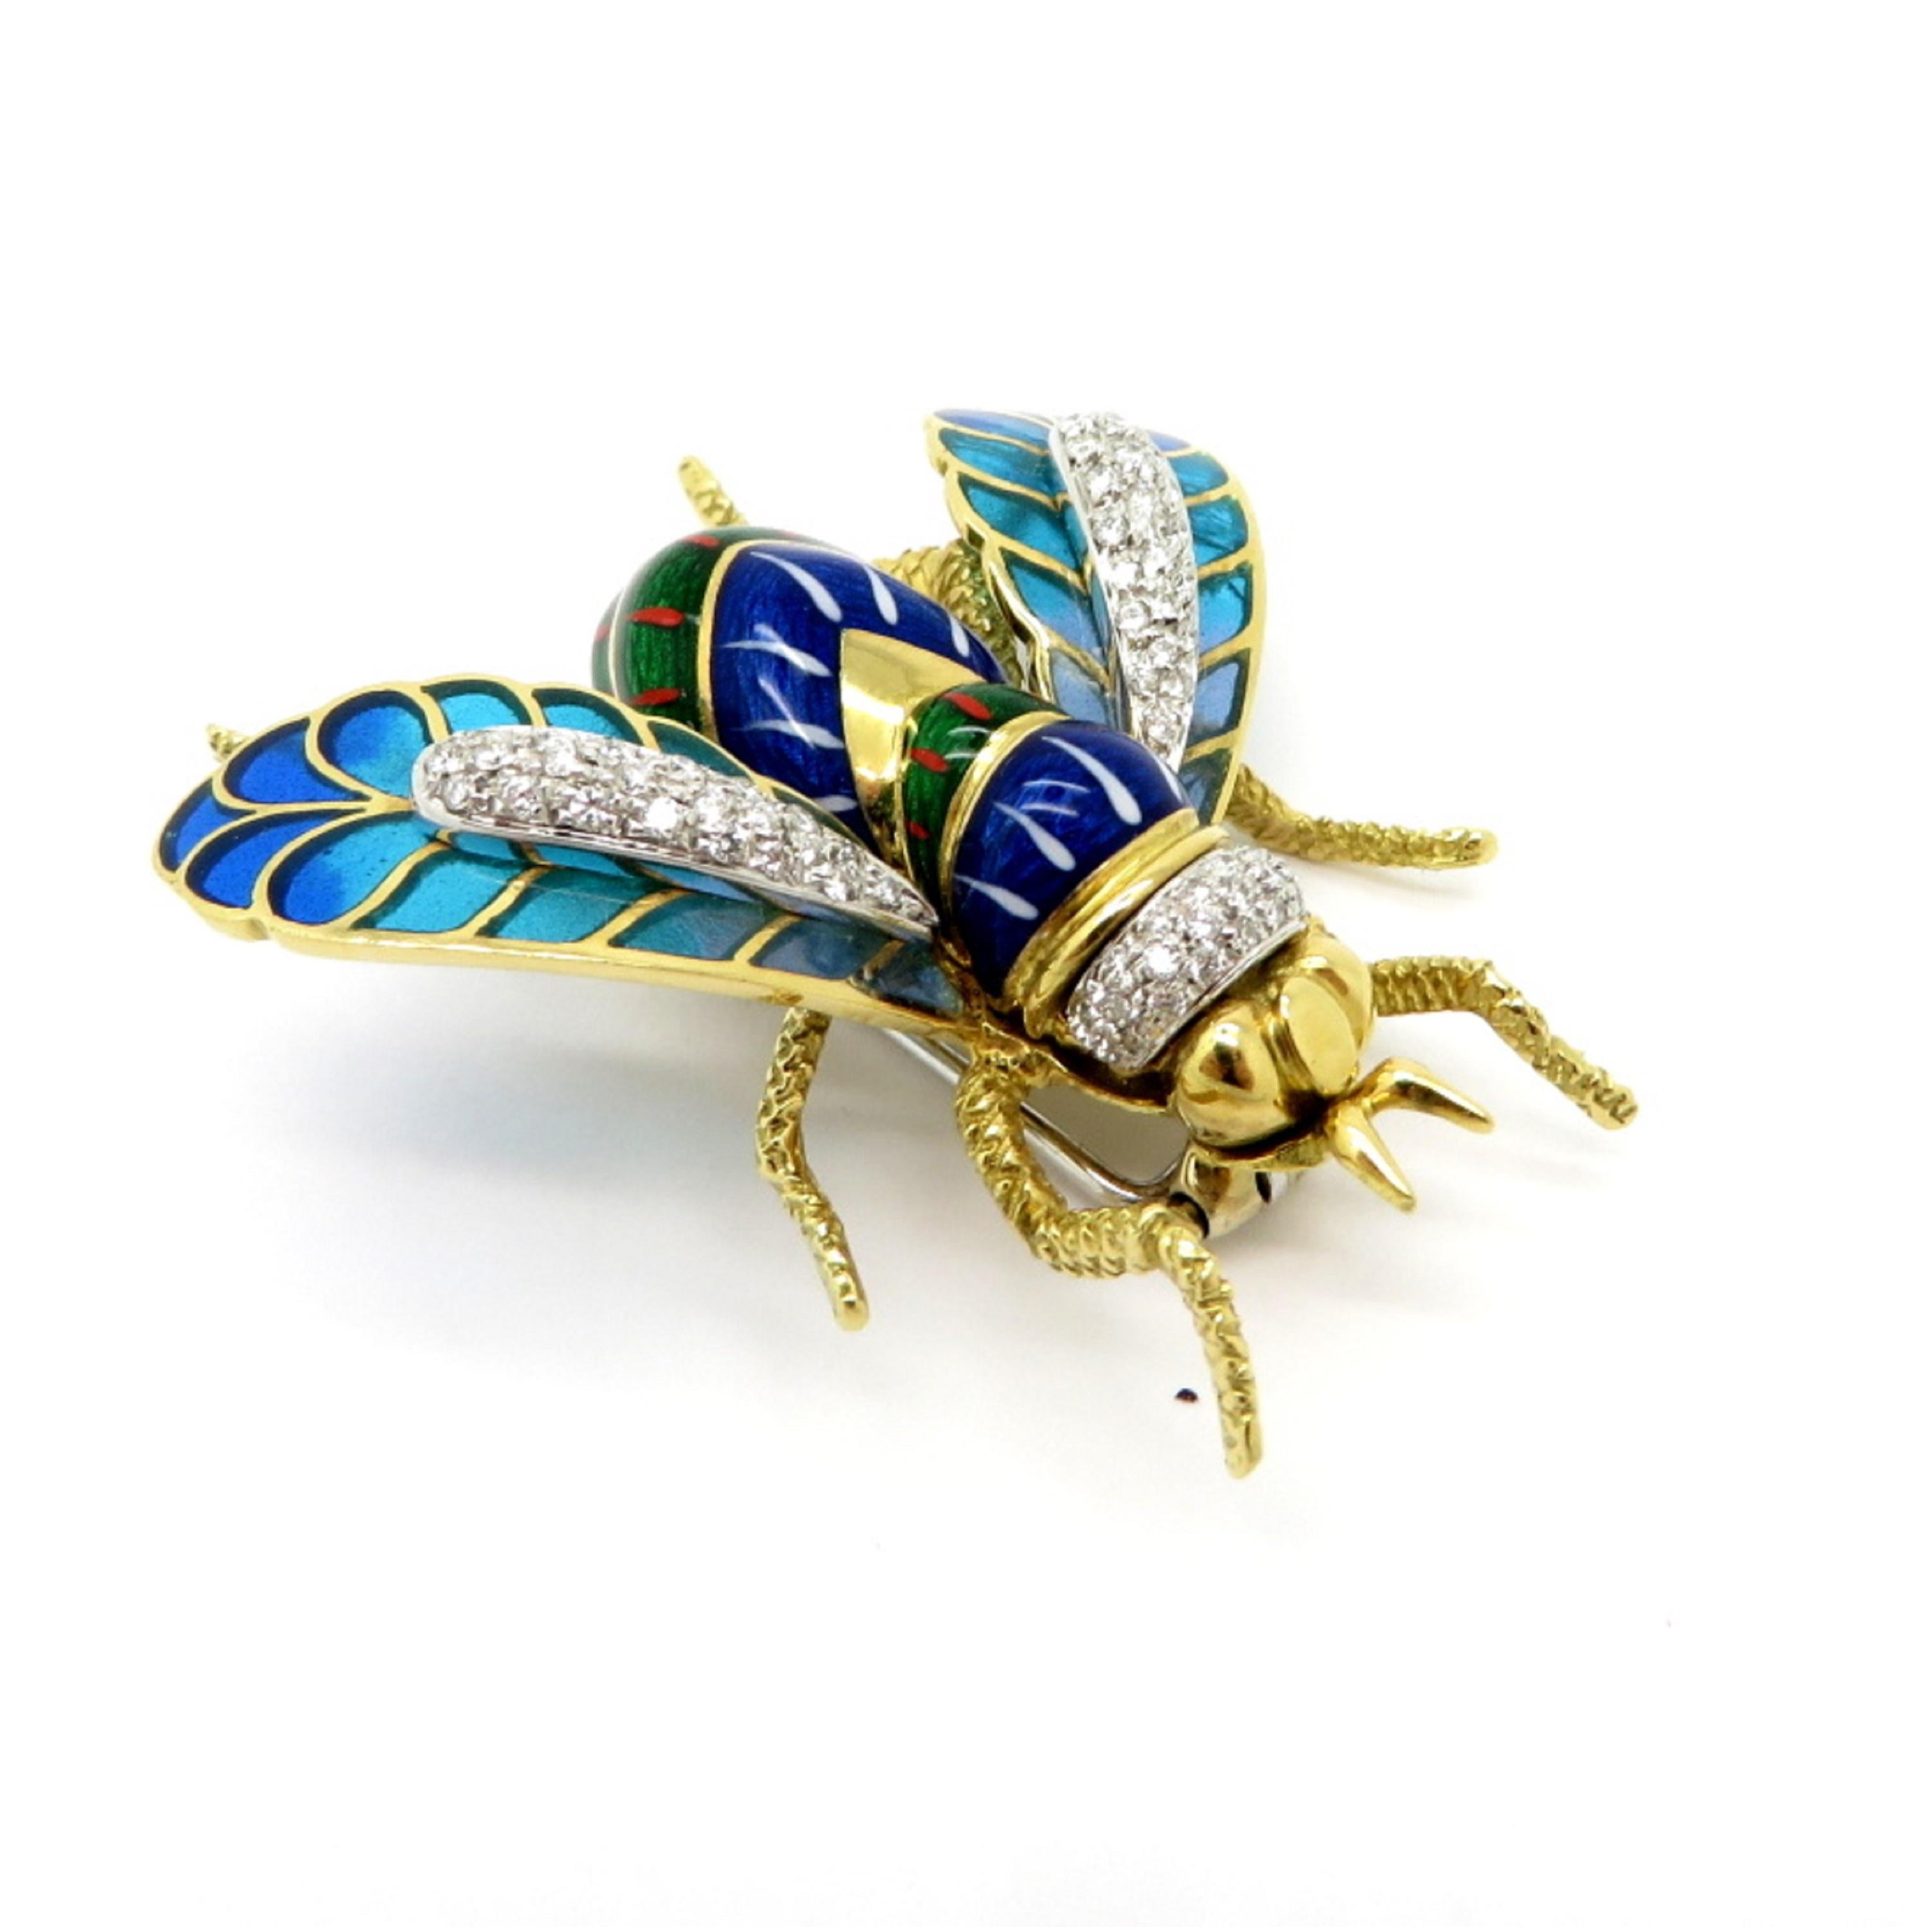 Estate 18K two-tone diamond Plique A’ Jour enamel bumblebee brooch pin. Showcasing 67 round brilliant cut diamonds weighing a combined total of 0.60 carats. It is secured with a double pin bar on the reverse side in a trombone style closure. The